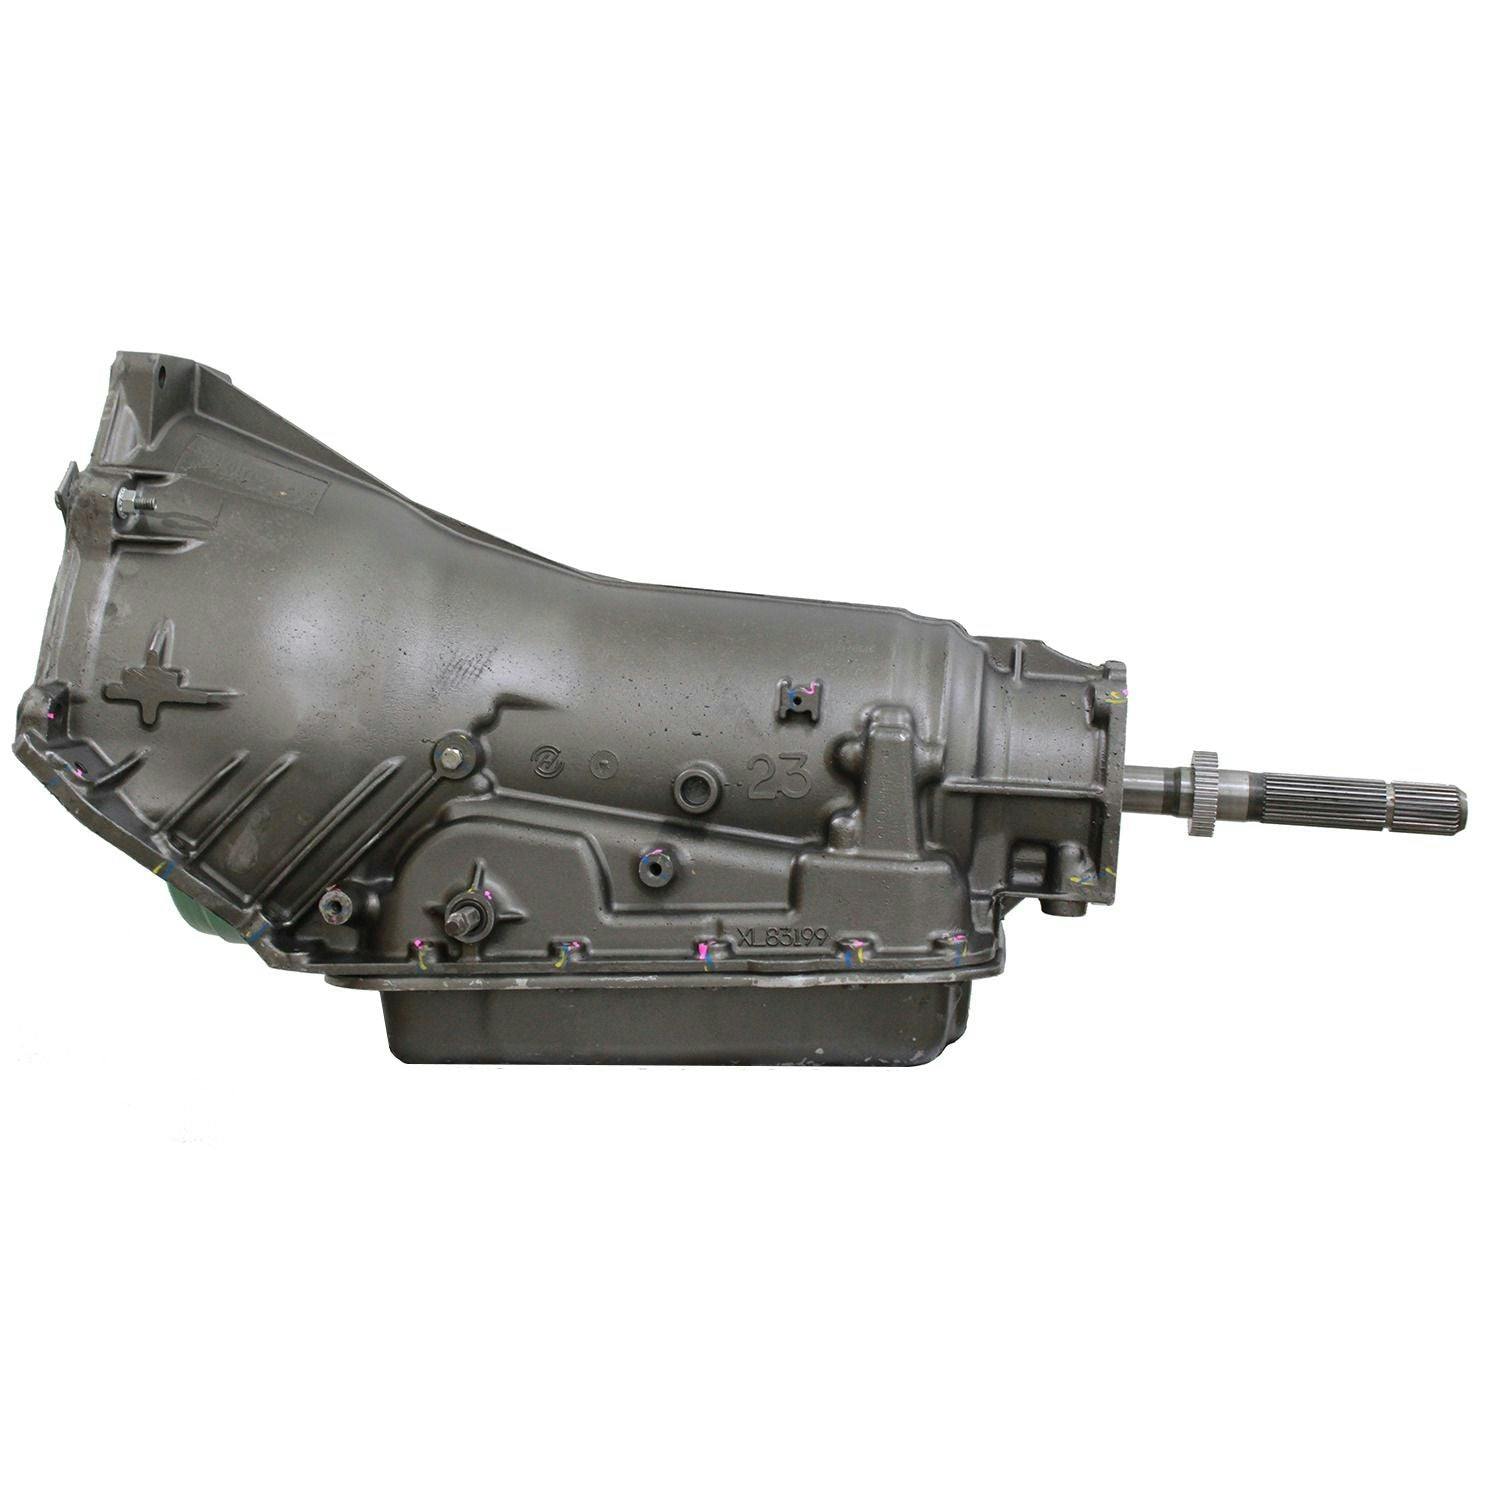 Automatic Transmission for 1996-1997 Chevrolet S10/GMC Sonoma/Isuzu Hombre RWD with 2.2L Inline-4 Engine